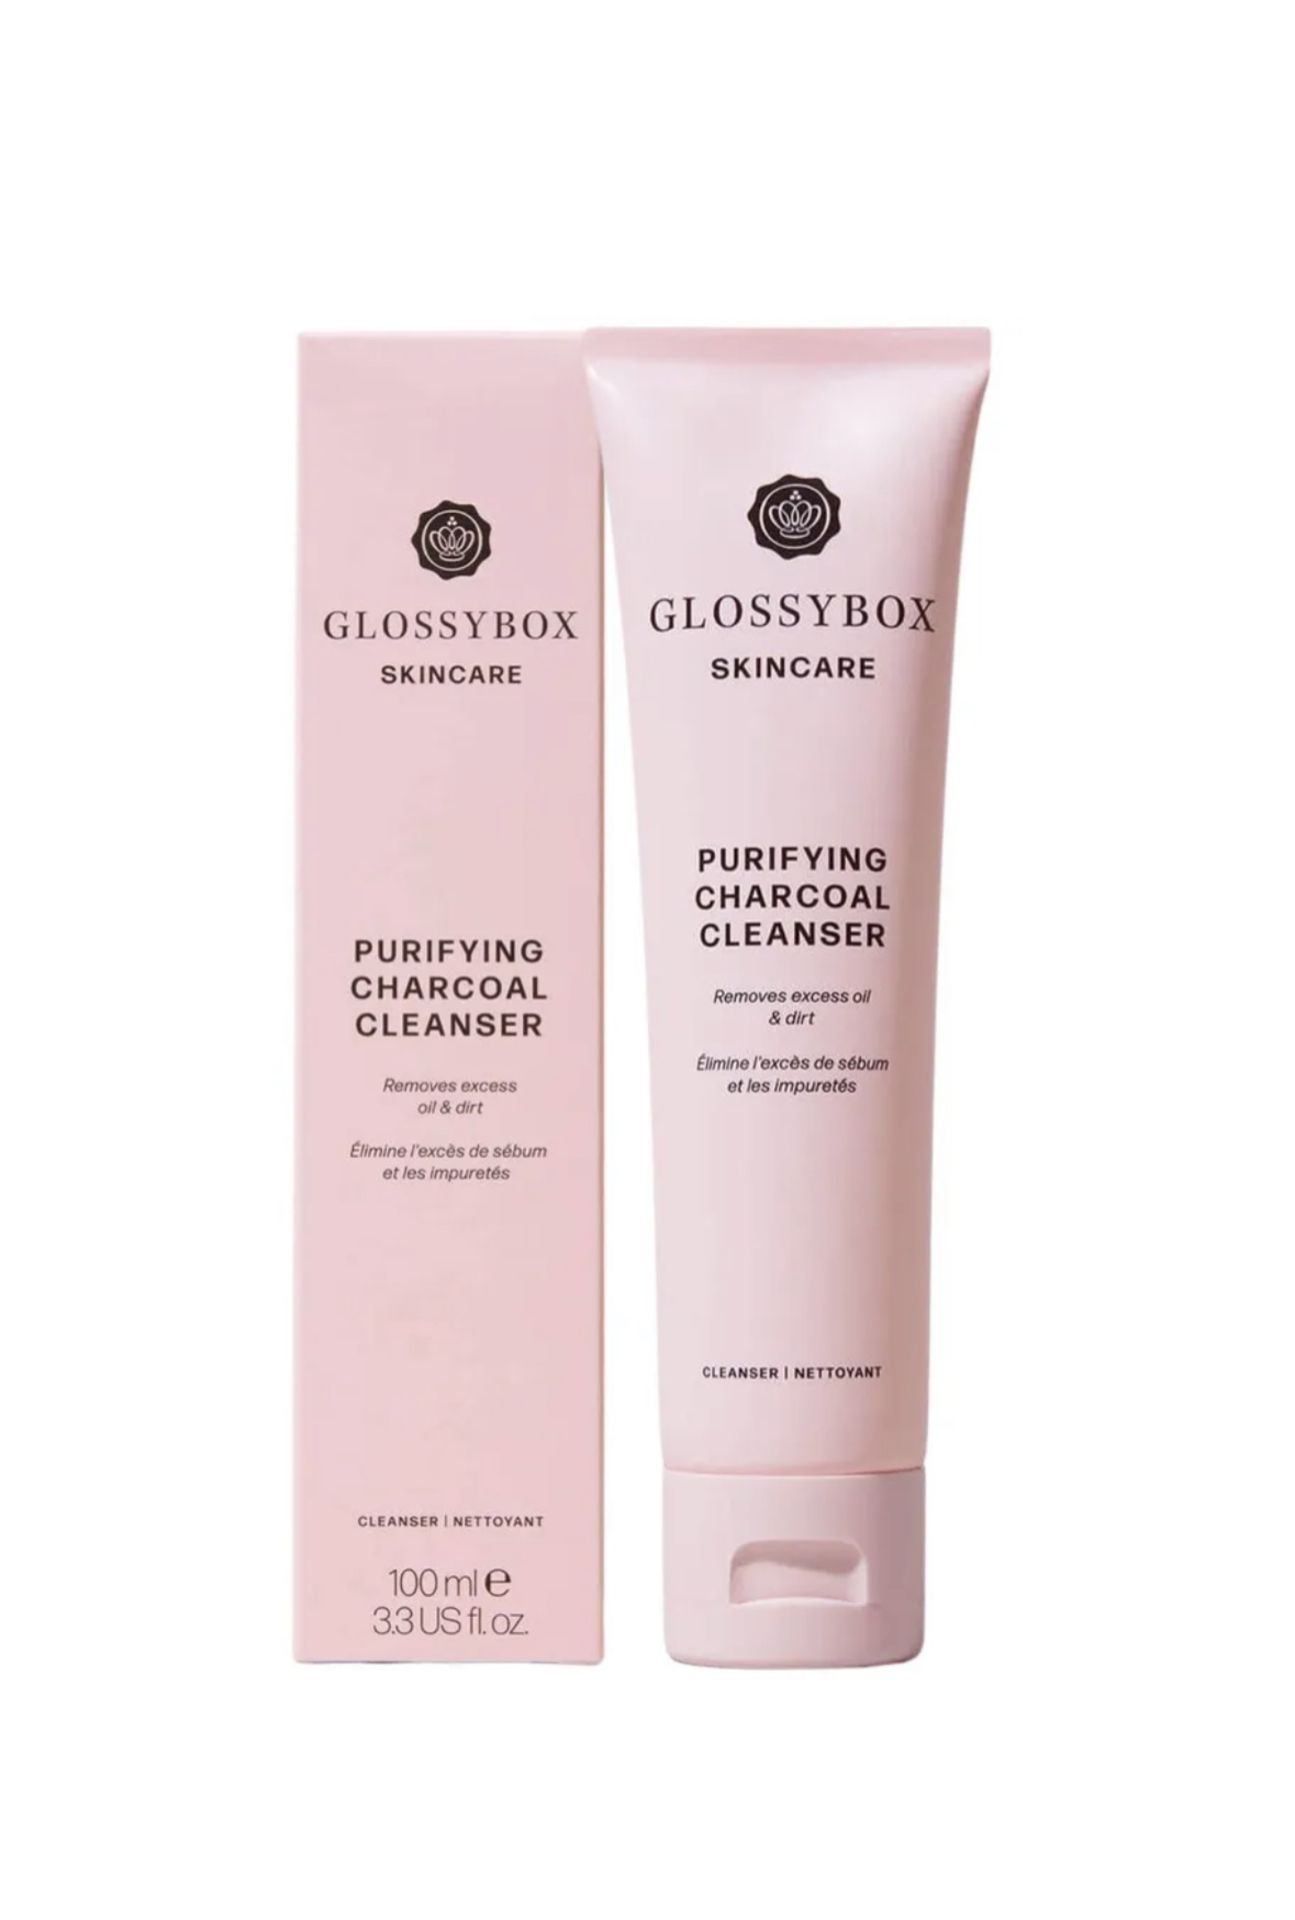 100 X GLOSSYBOX PURIFYING CHARCOAL CLEANSER RRP £1300